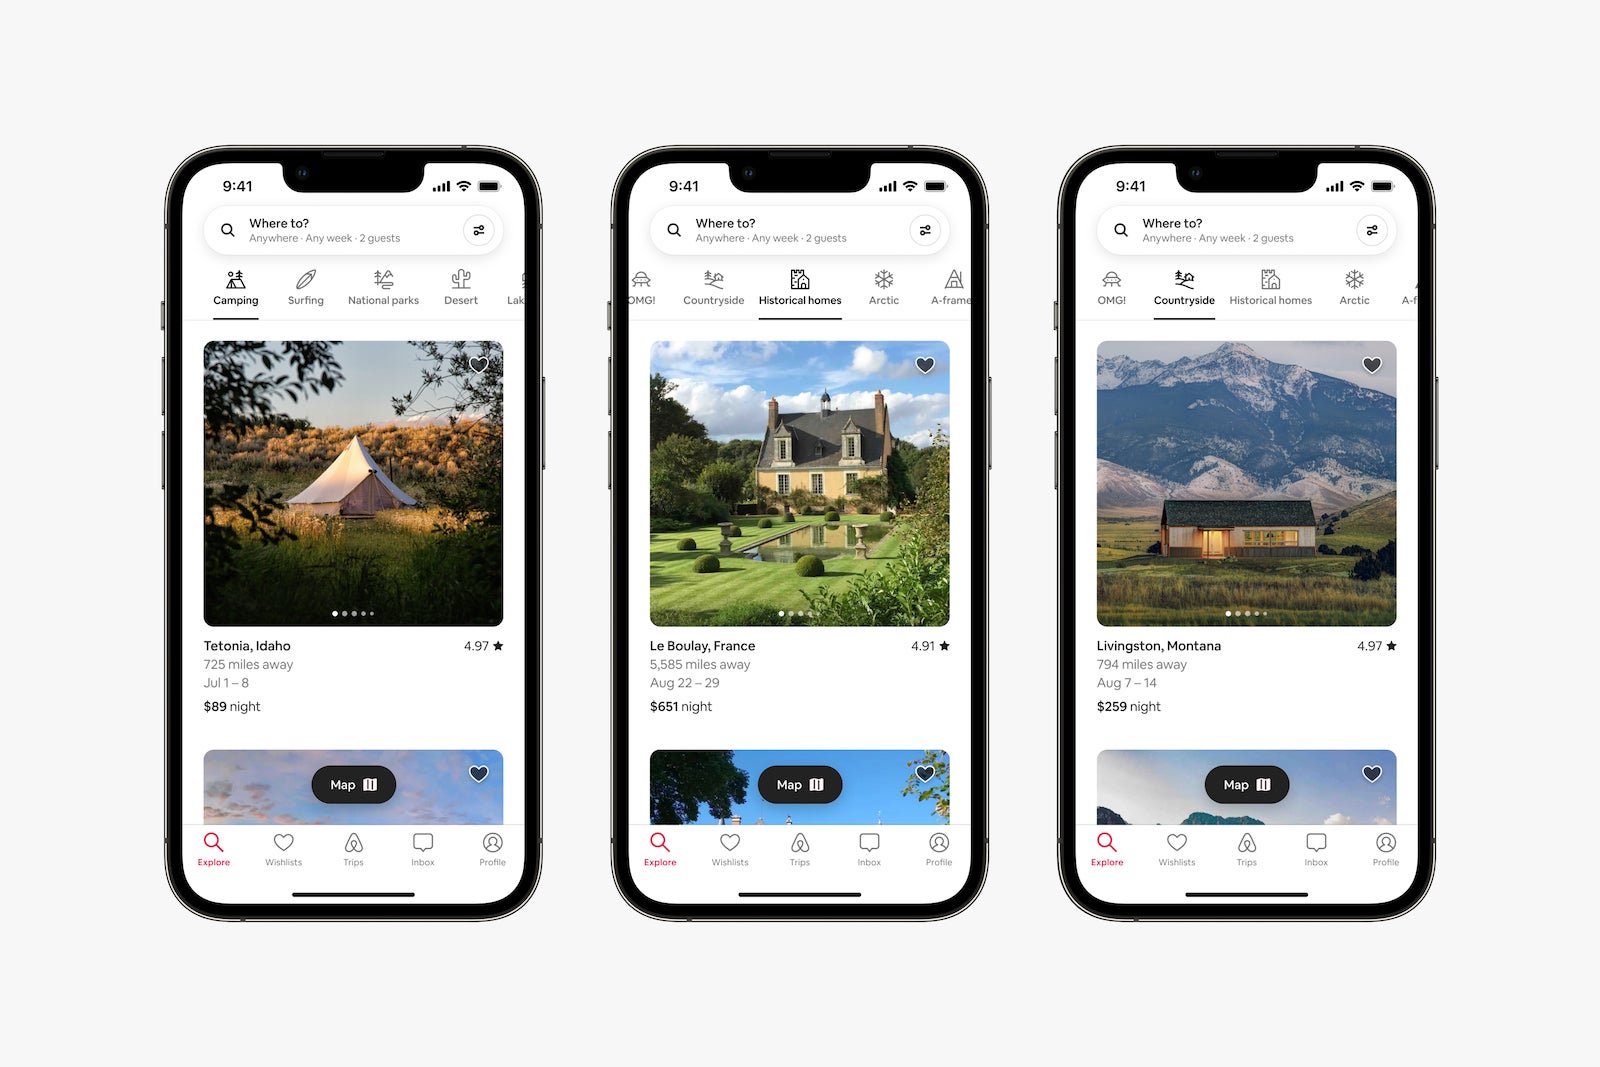 iPhone displaying Airbnb listings side by side